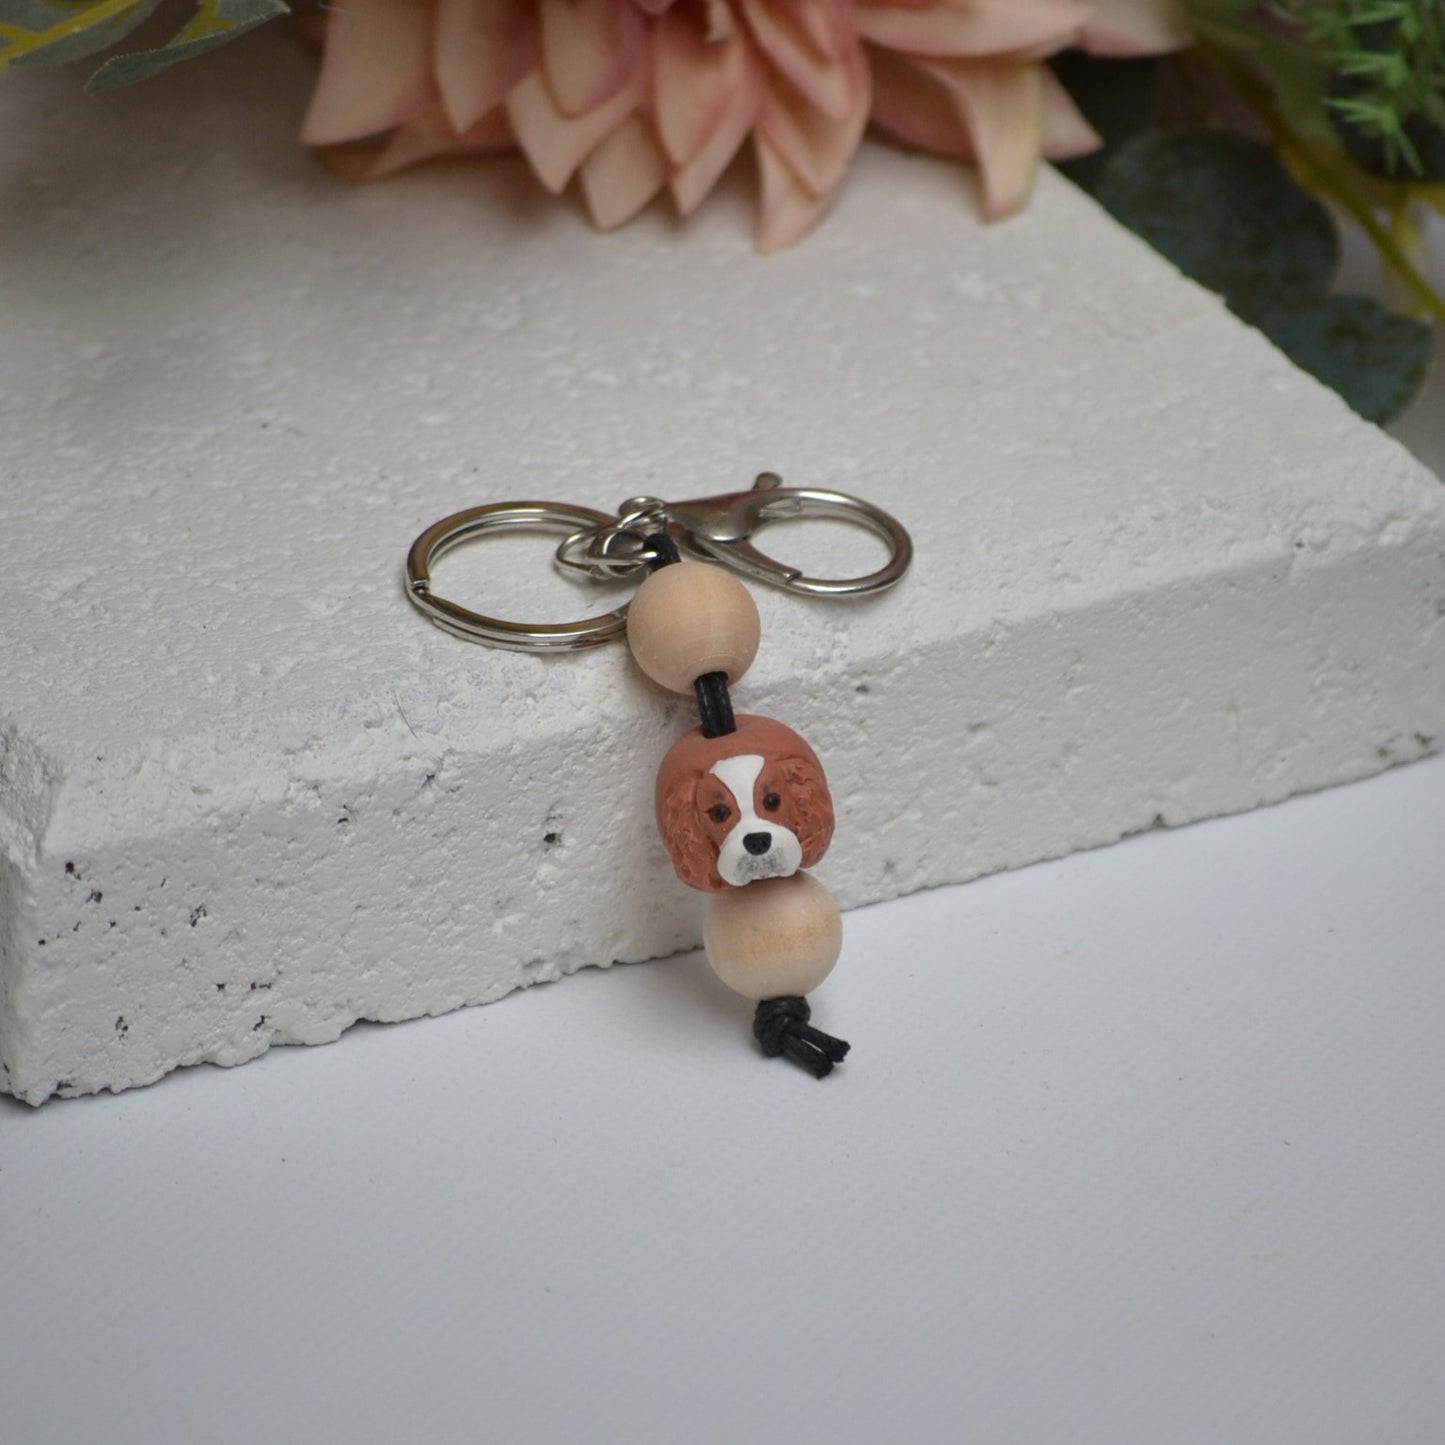 Handmade cavalier king charles spaniel polymer clay and timber keying on white textured background with a pink flower in the background